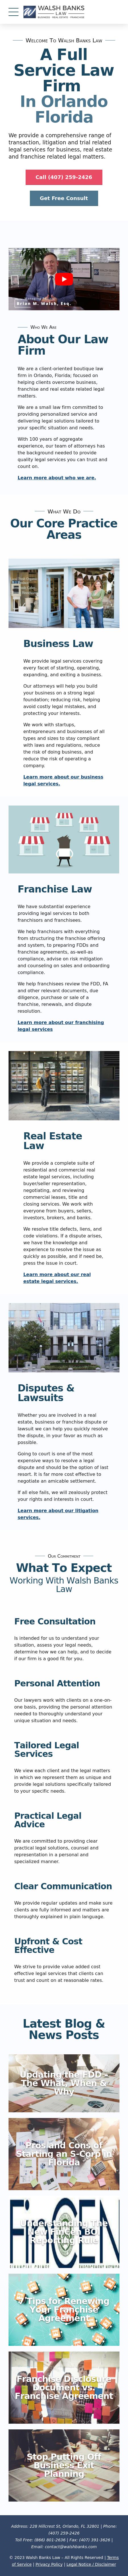 Walsh Law Group - Rutherford NJ Lawyers